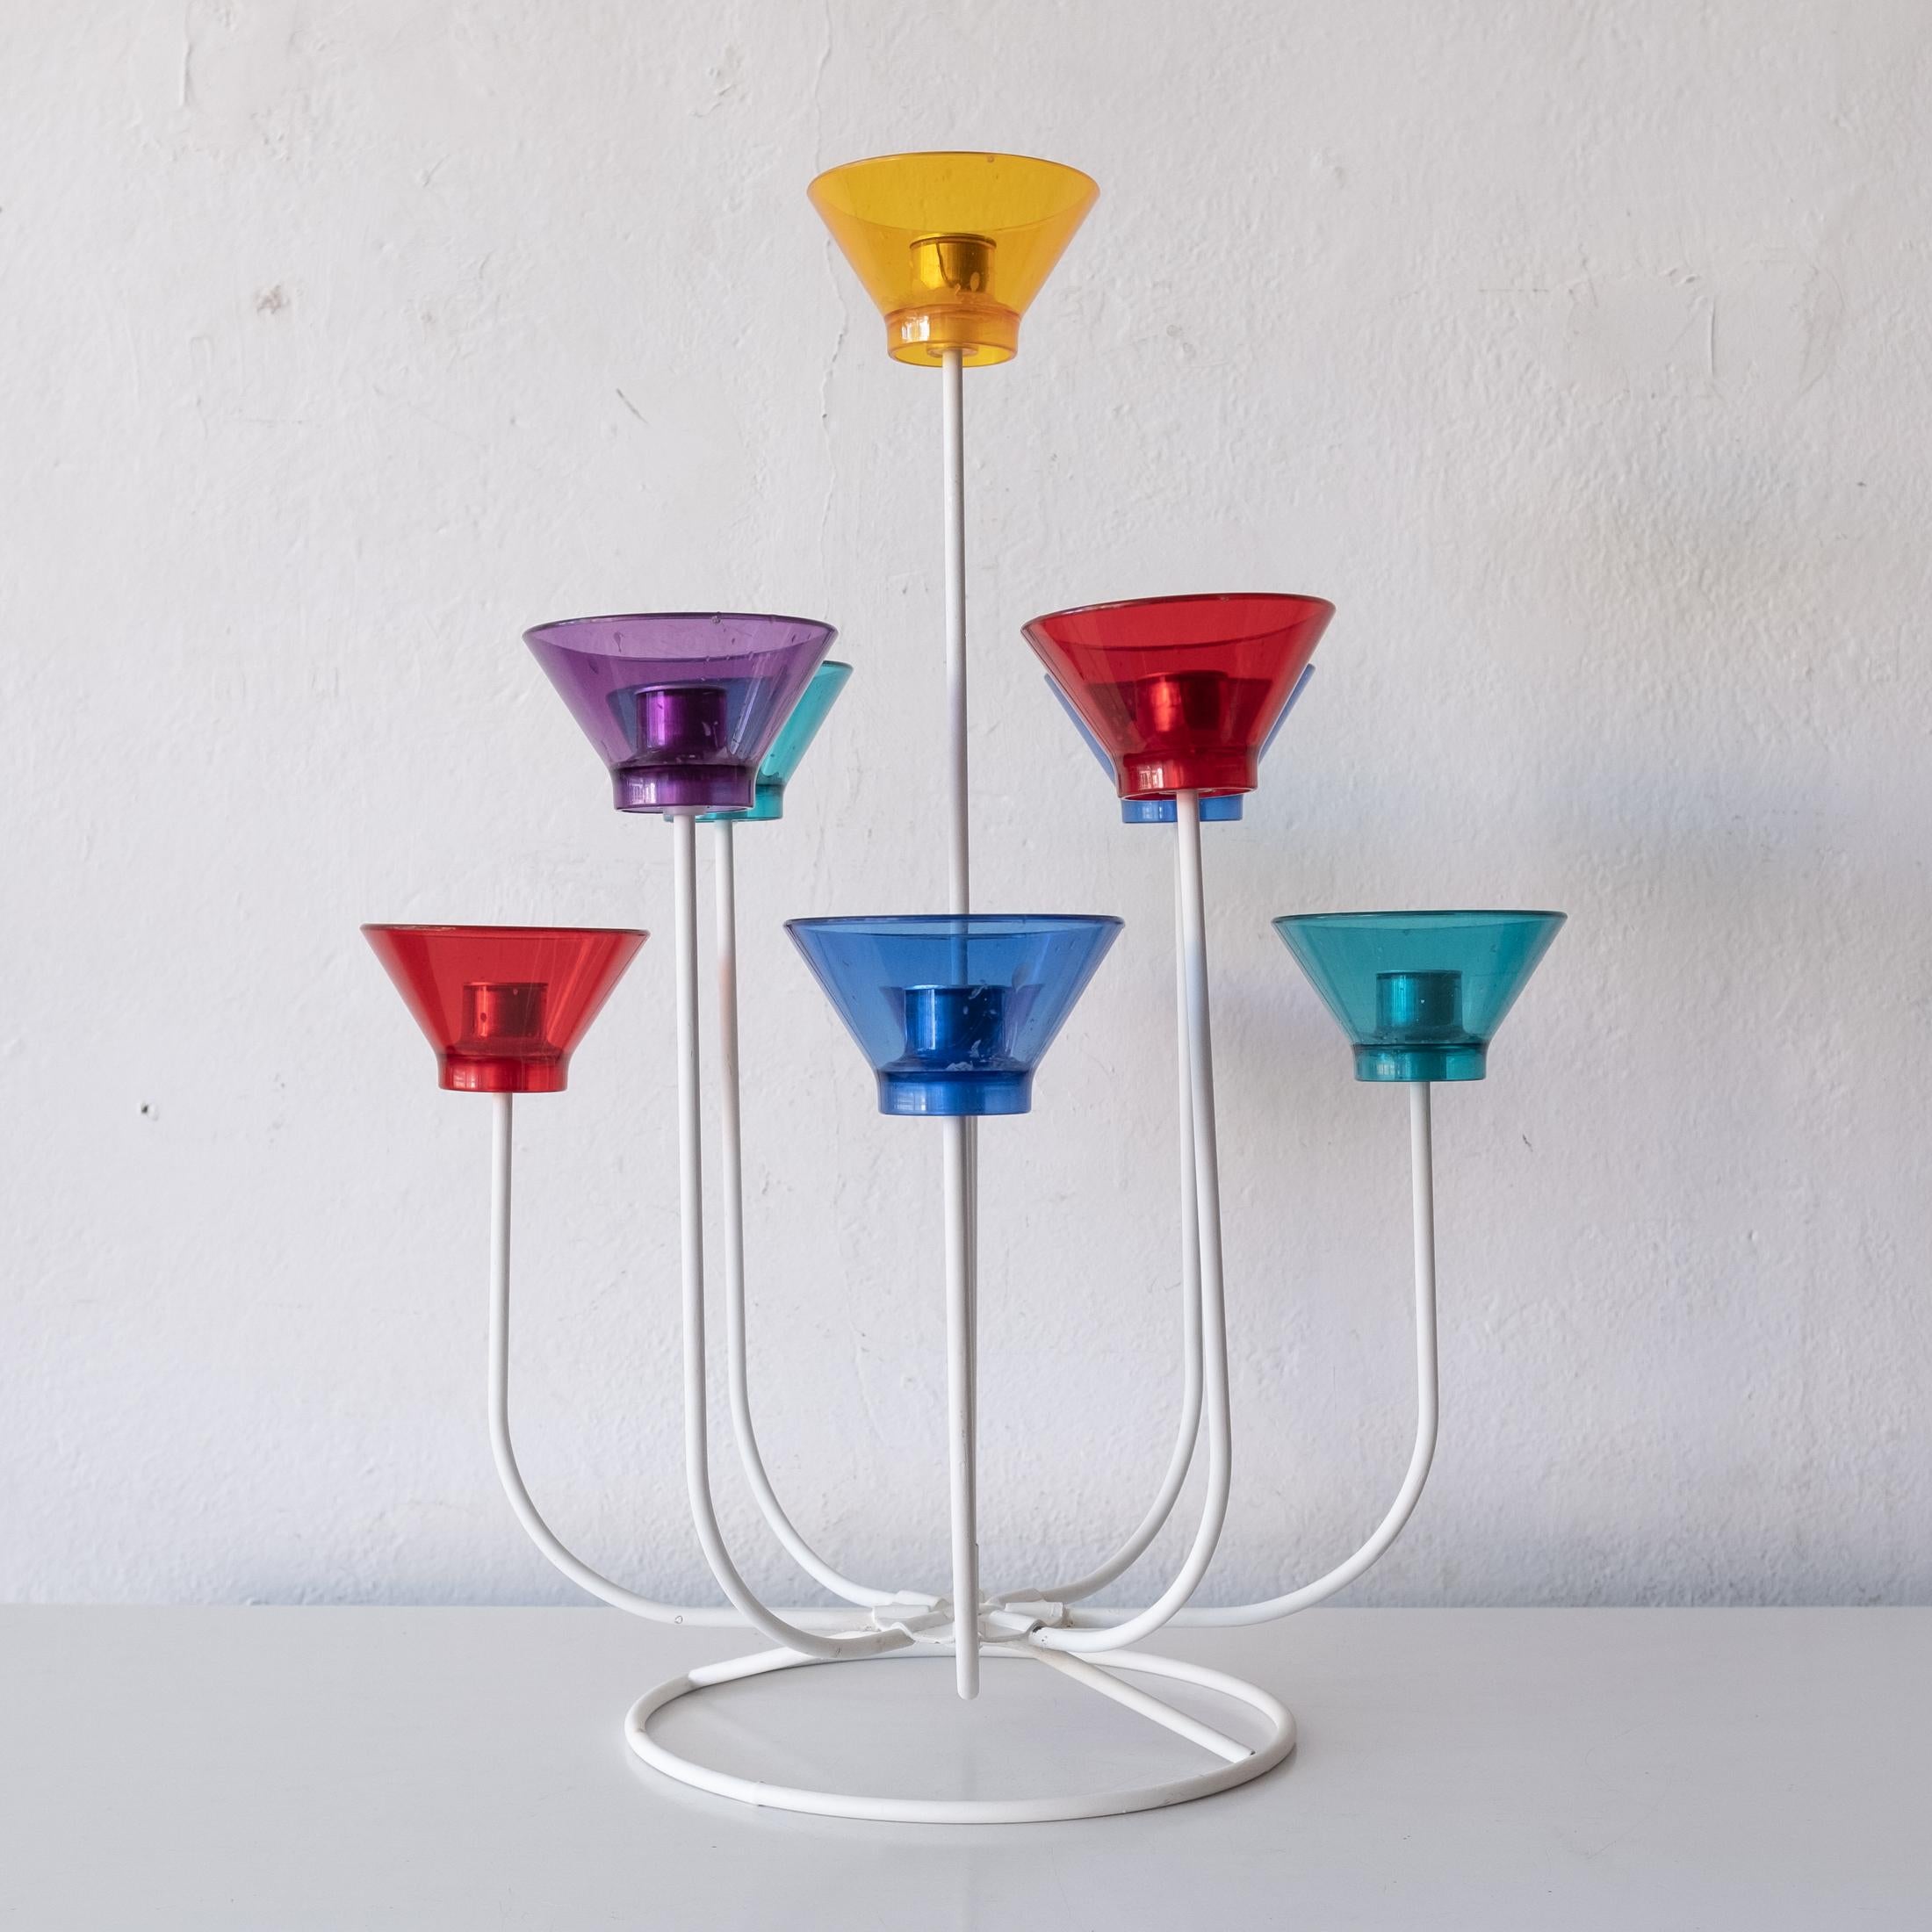 Danish Modern candelabra with metal frame and acrylic cups. Would make a great table centerpiece. Denmark, 1950s.